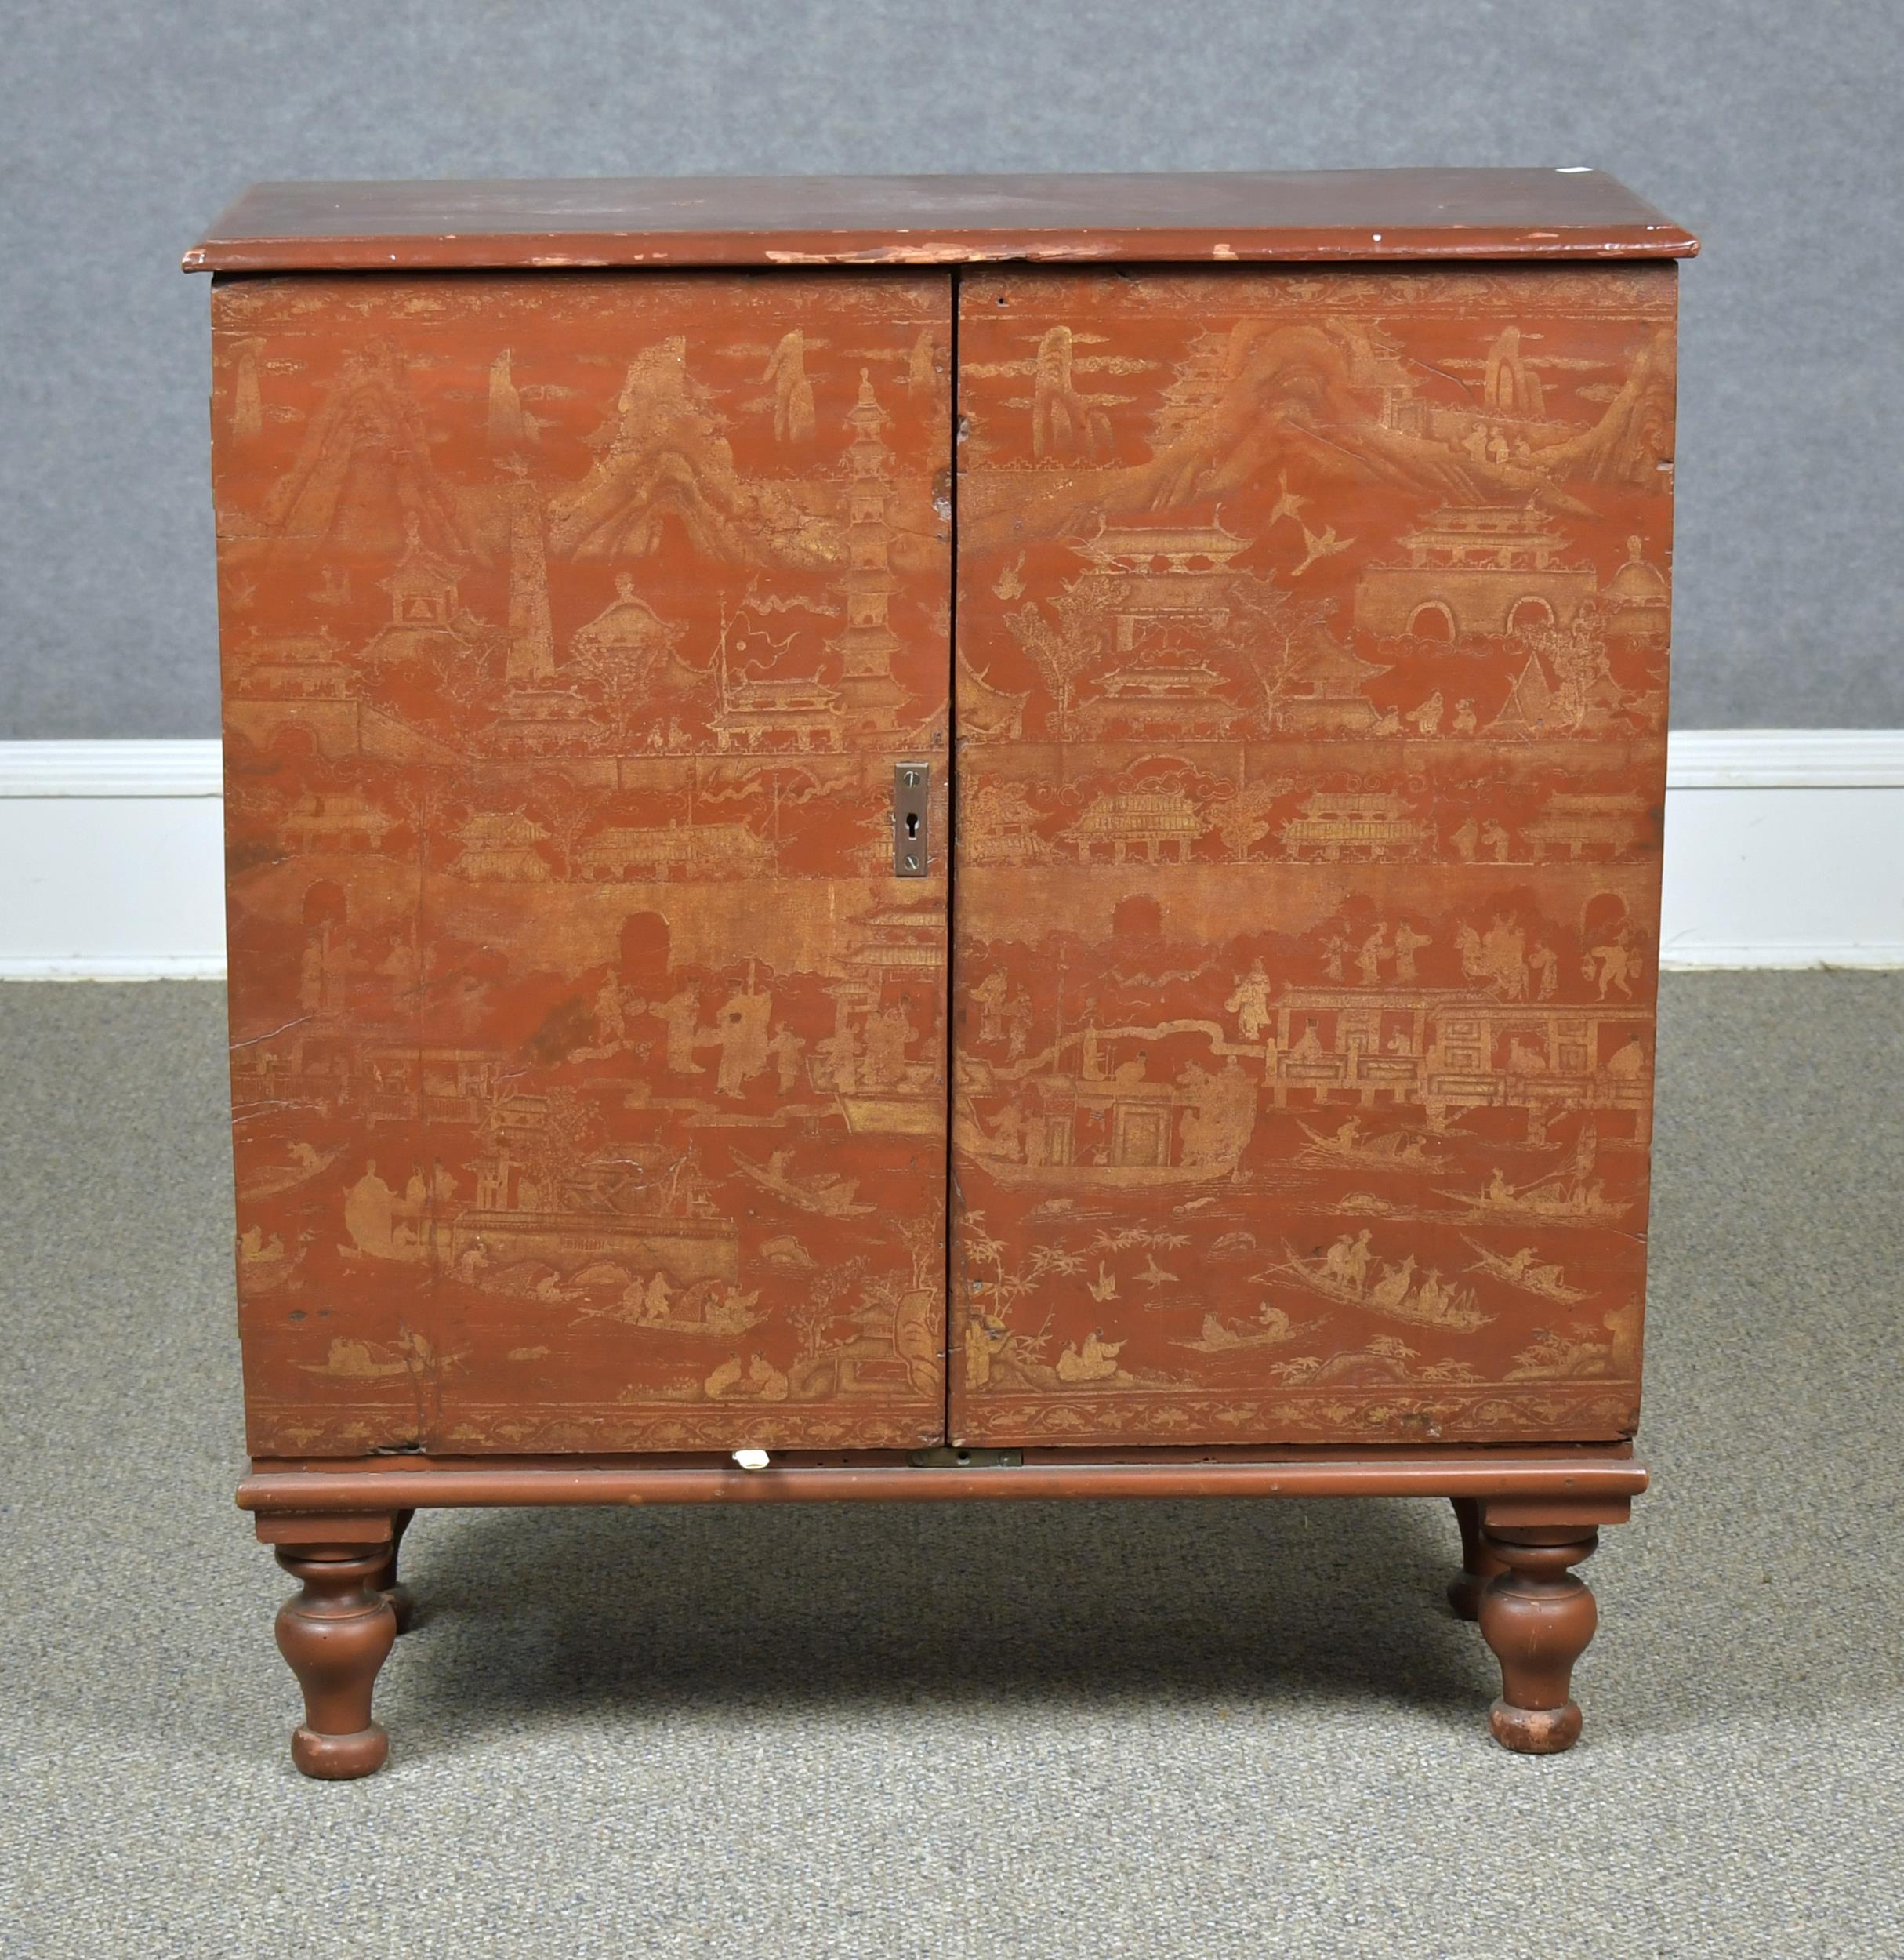 EARLY 19TH C. ENGLISH CHINOISERIE